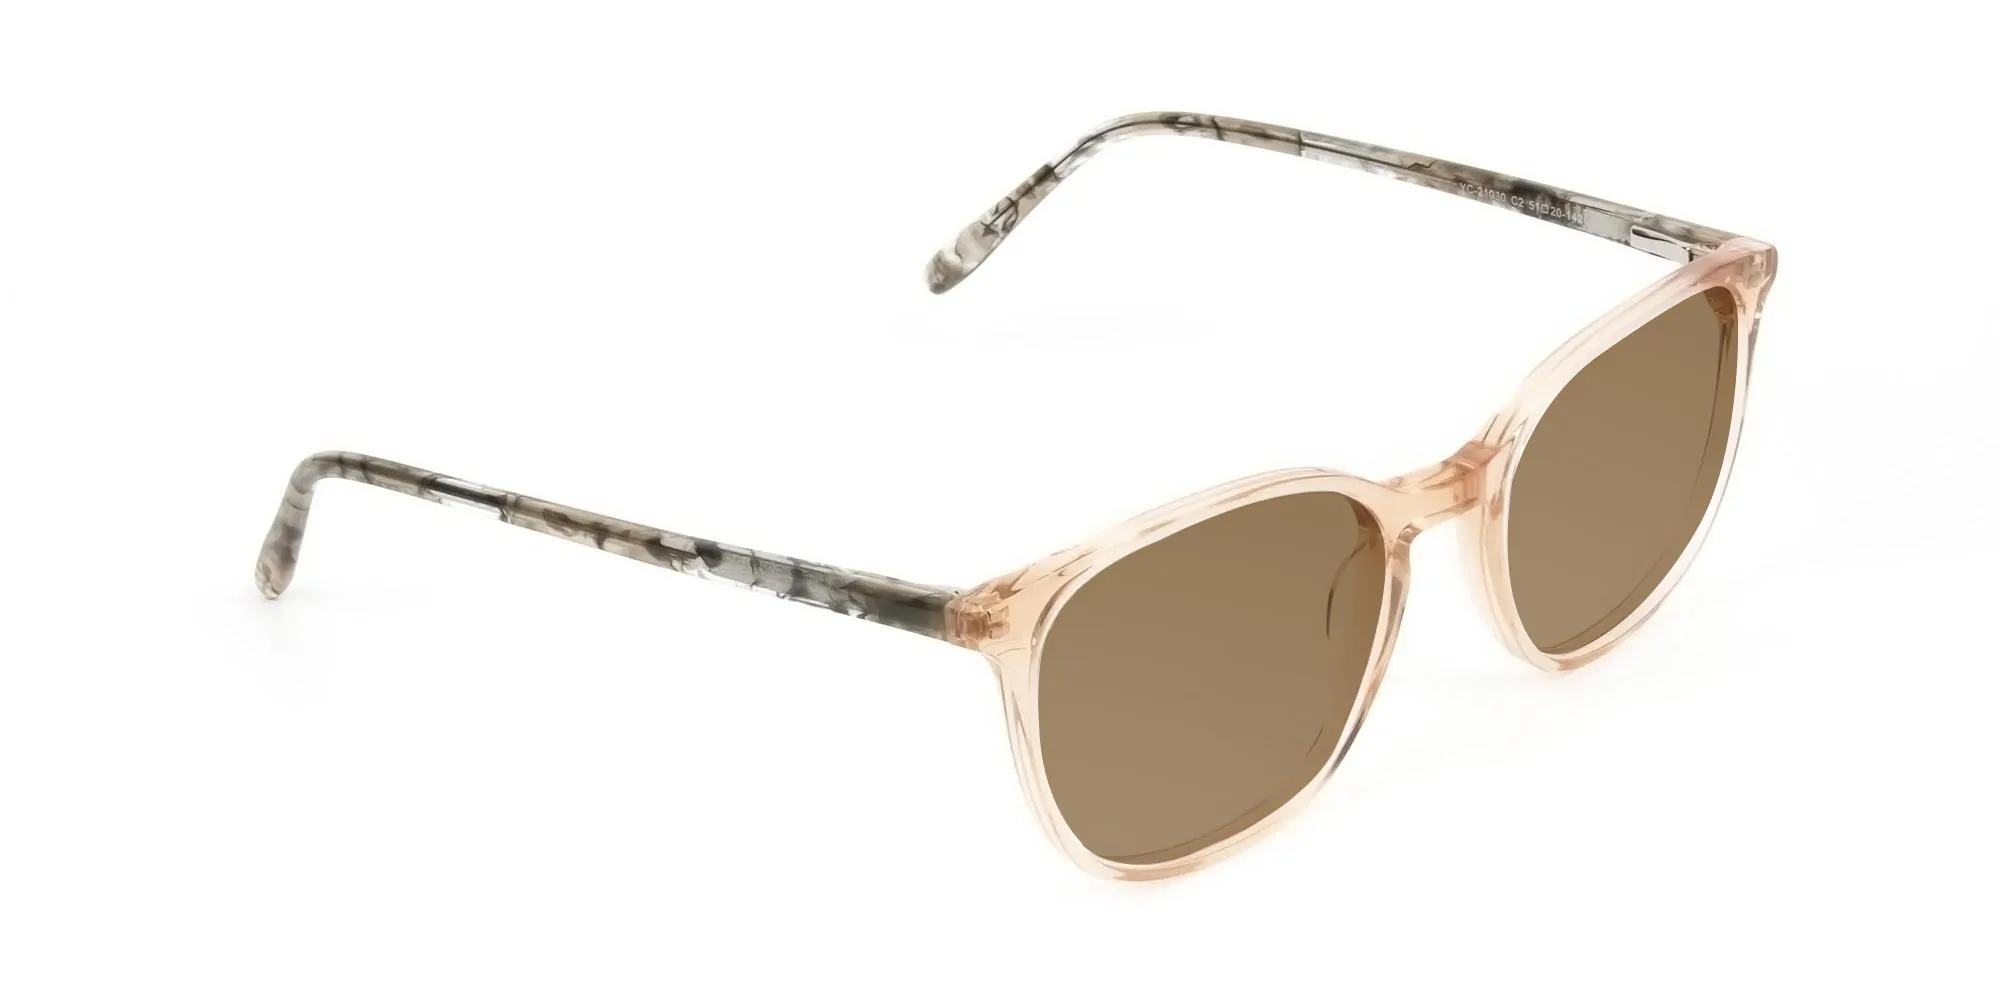 Crystal-brown-with-grey-marble-temple-brown-tinted-sunglasses-frames-2